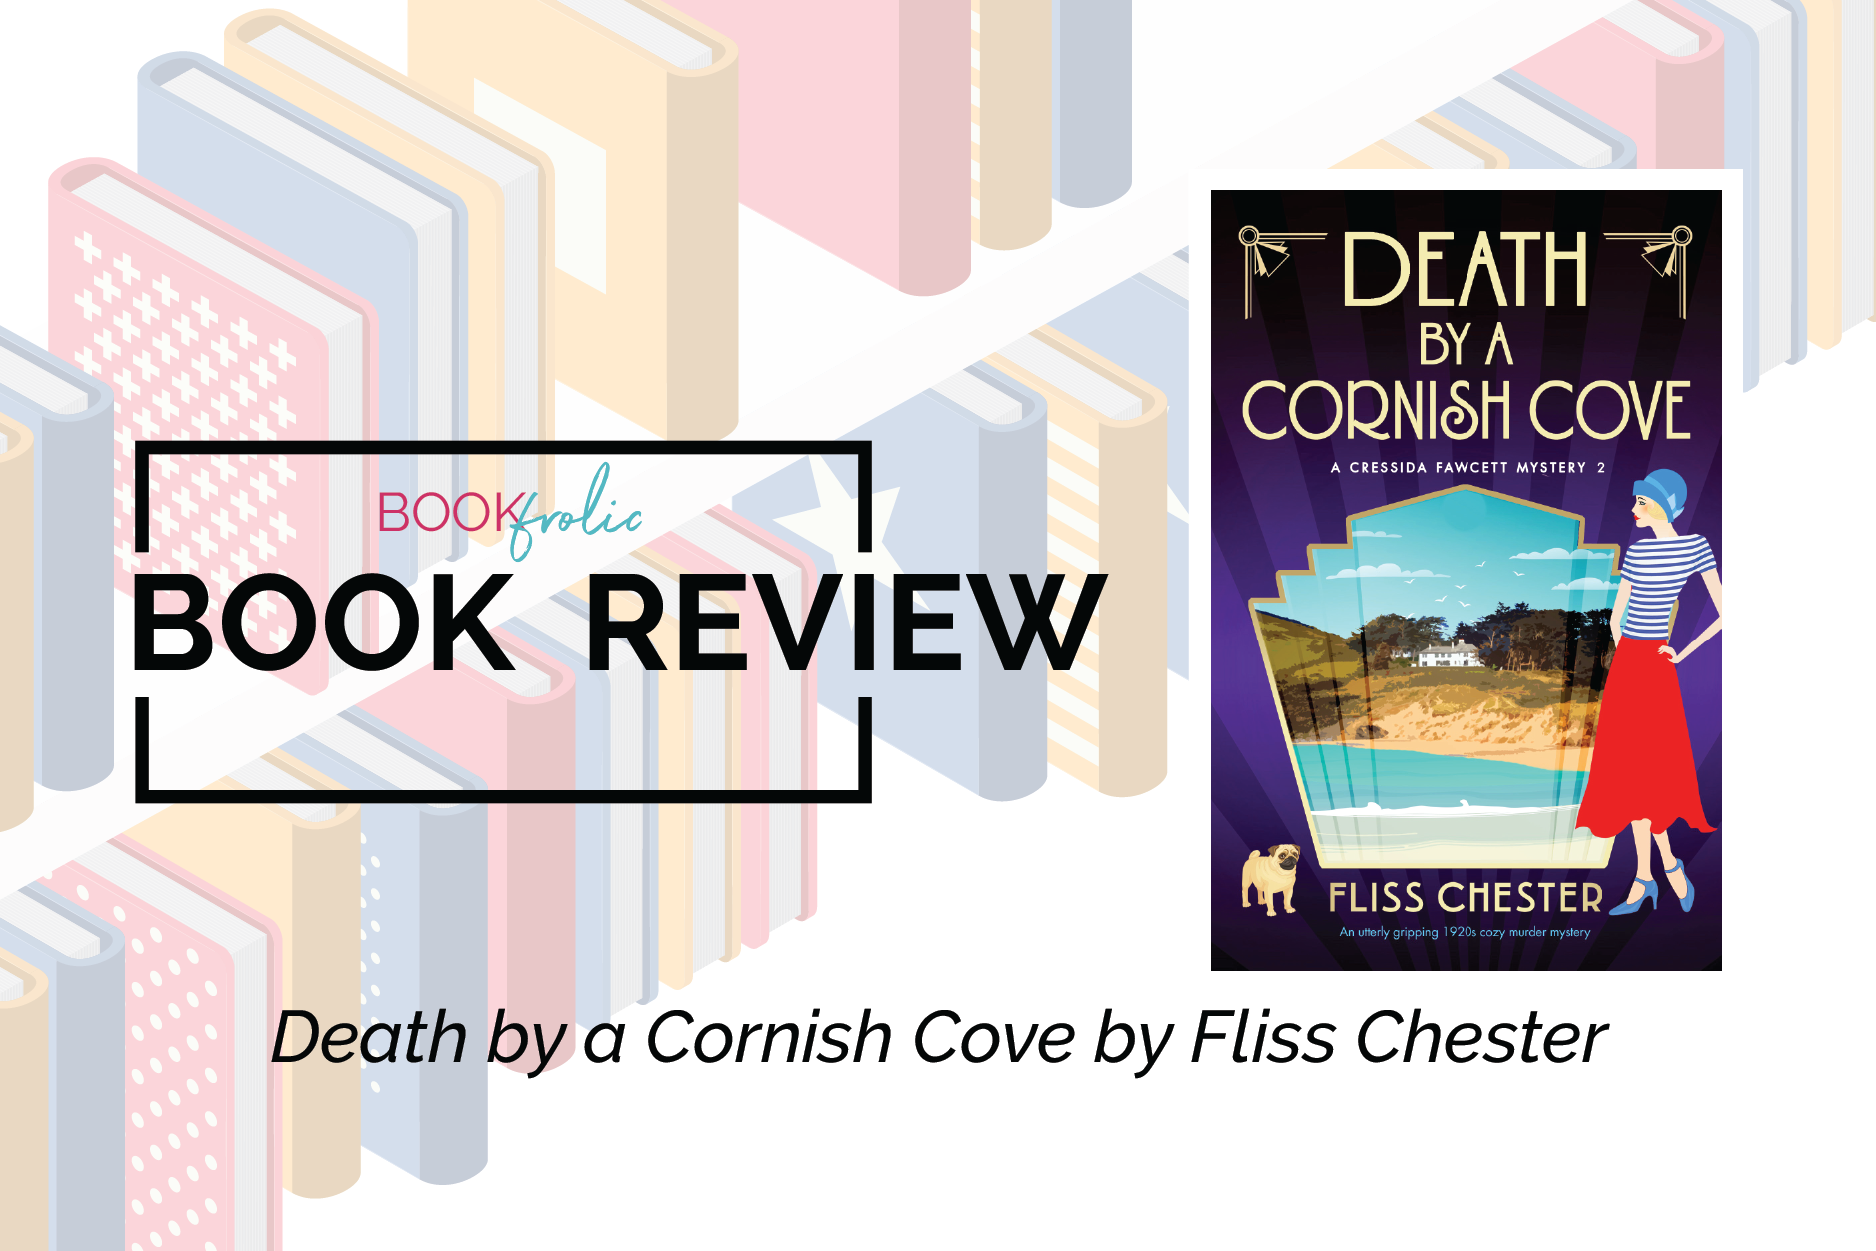 book review banner for Death by a Cornish Cove by Fliss Chester